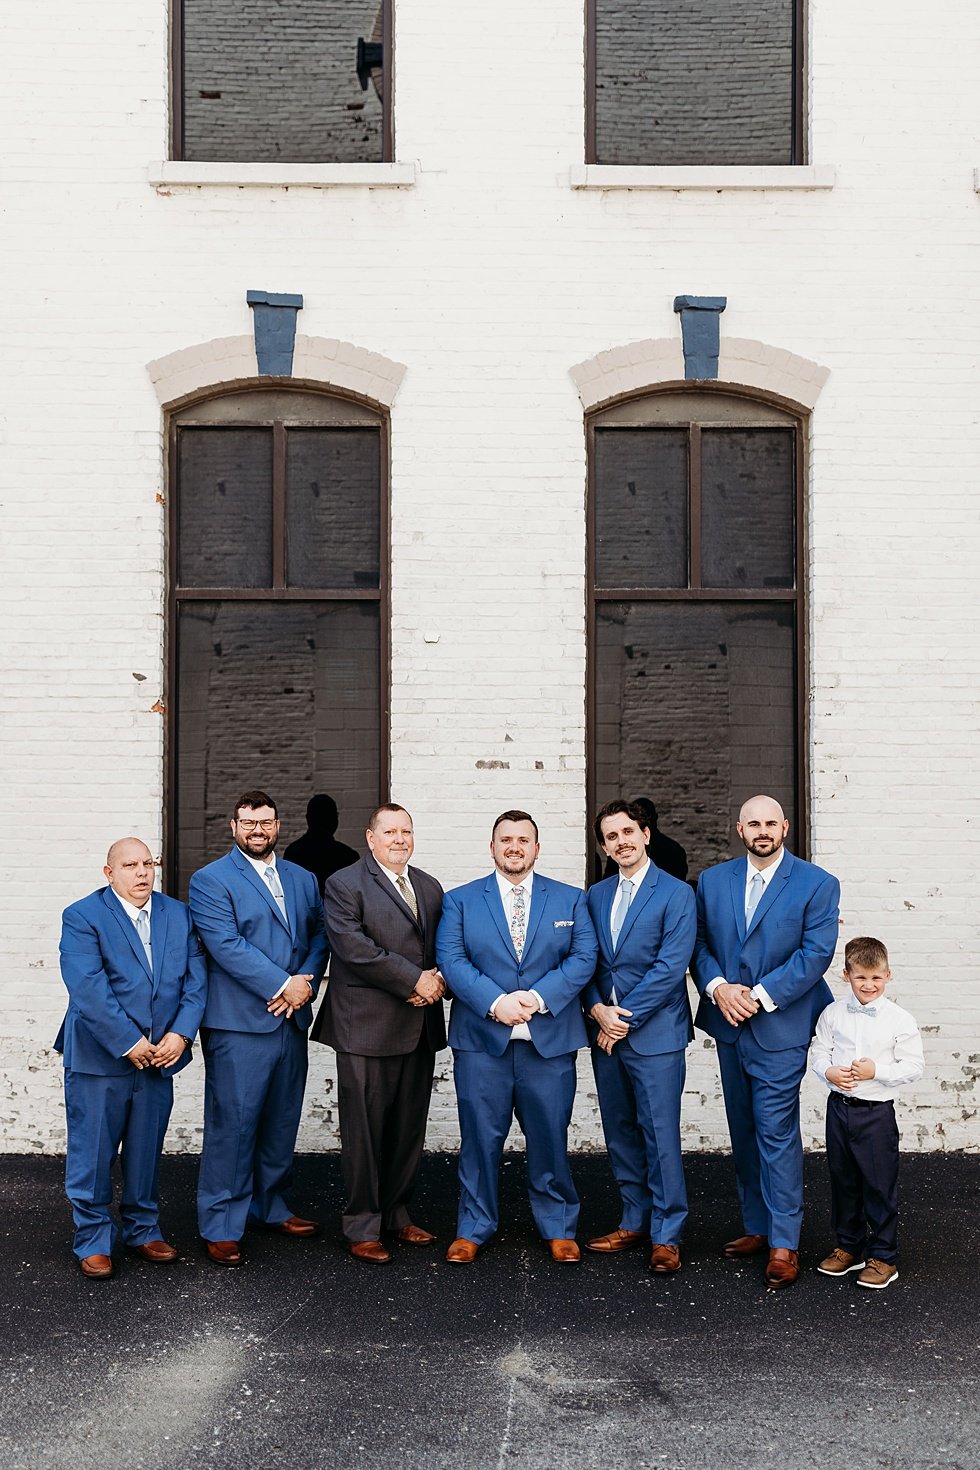  Groom and groomsmen at the Refinery on wedding day. Spring wedding at The Refinery Jeffersonville, Indiana 